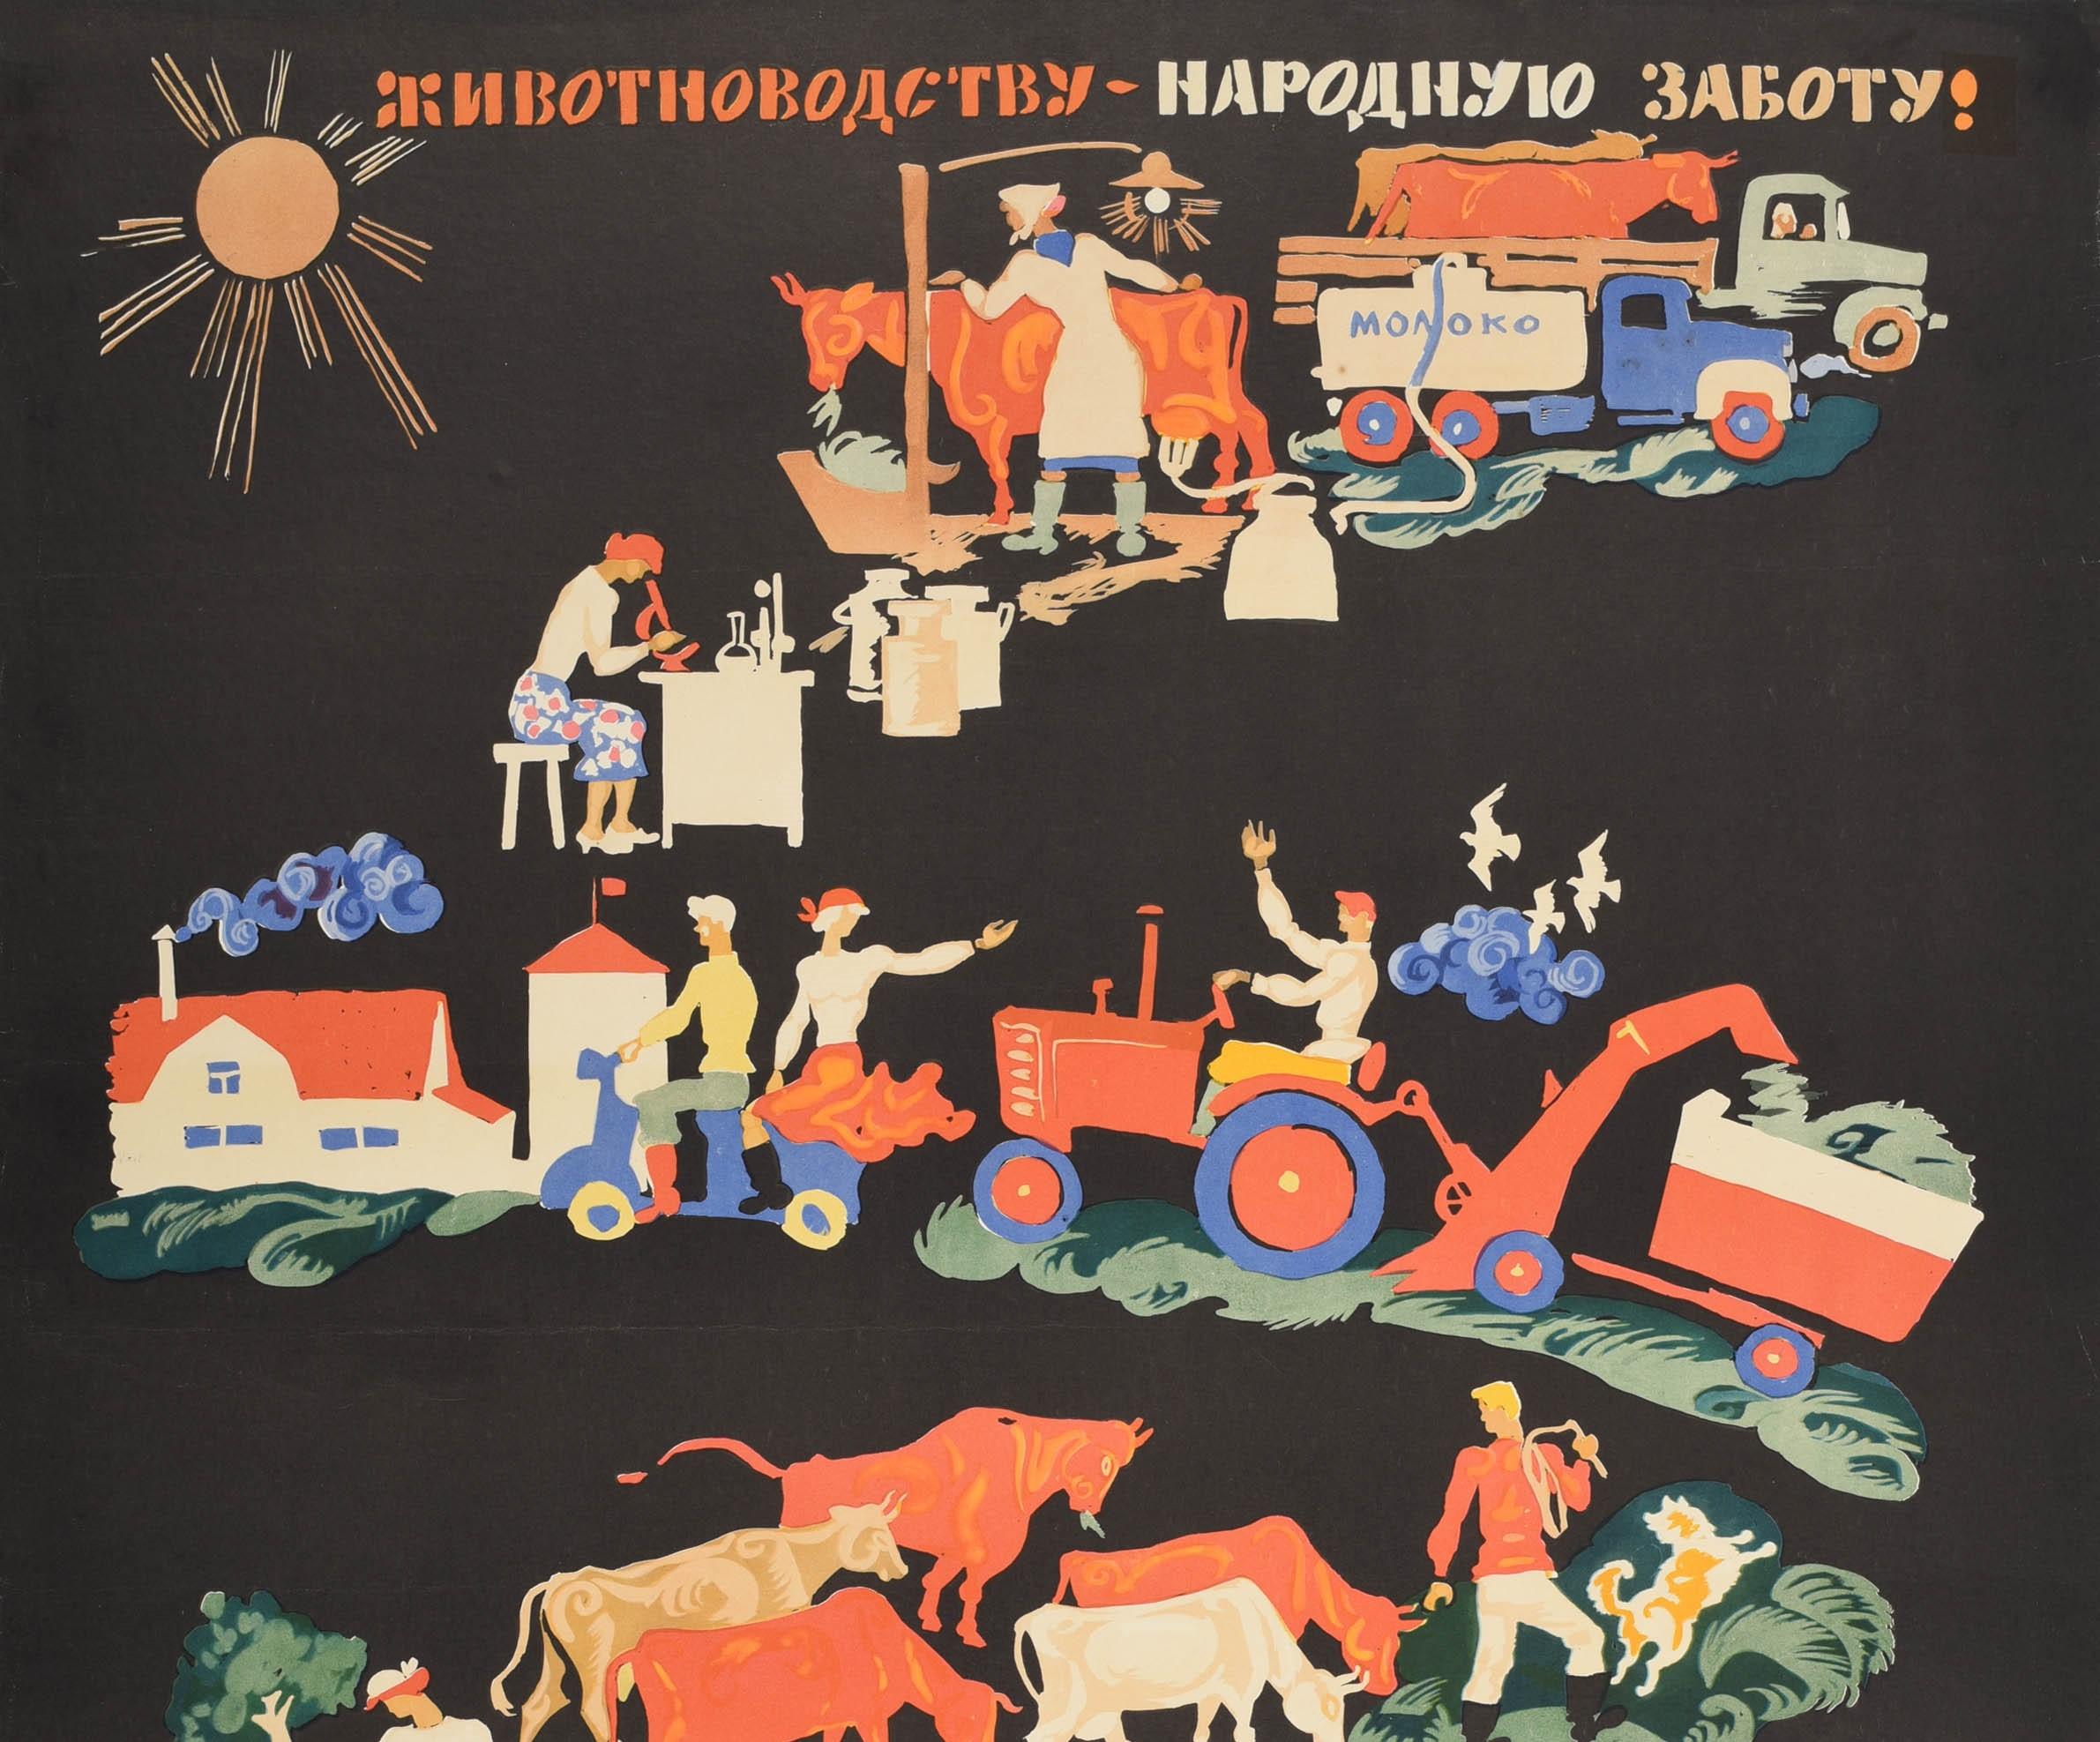 Original vintage Soviet propaganda poster - Give National Care to Animal Farming! / ?????????????? ???????? ??????! - featuring agriculture artwork depicting flowing images against a dark background showing cows being transported on a lorry and a